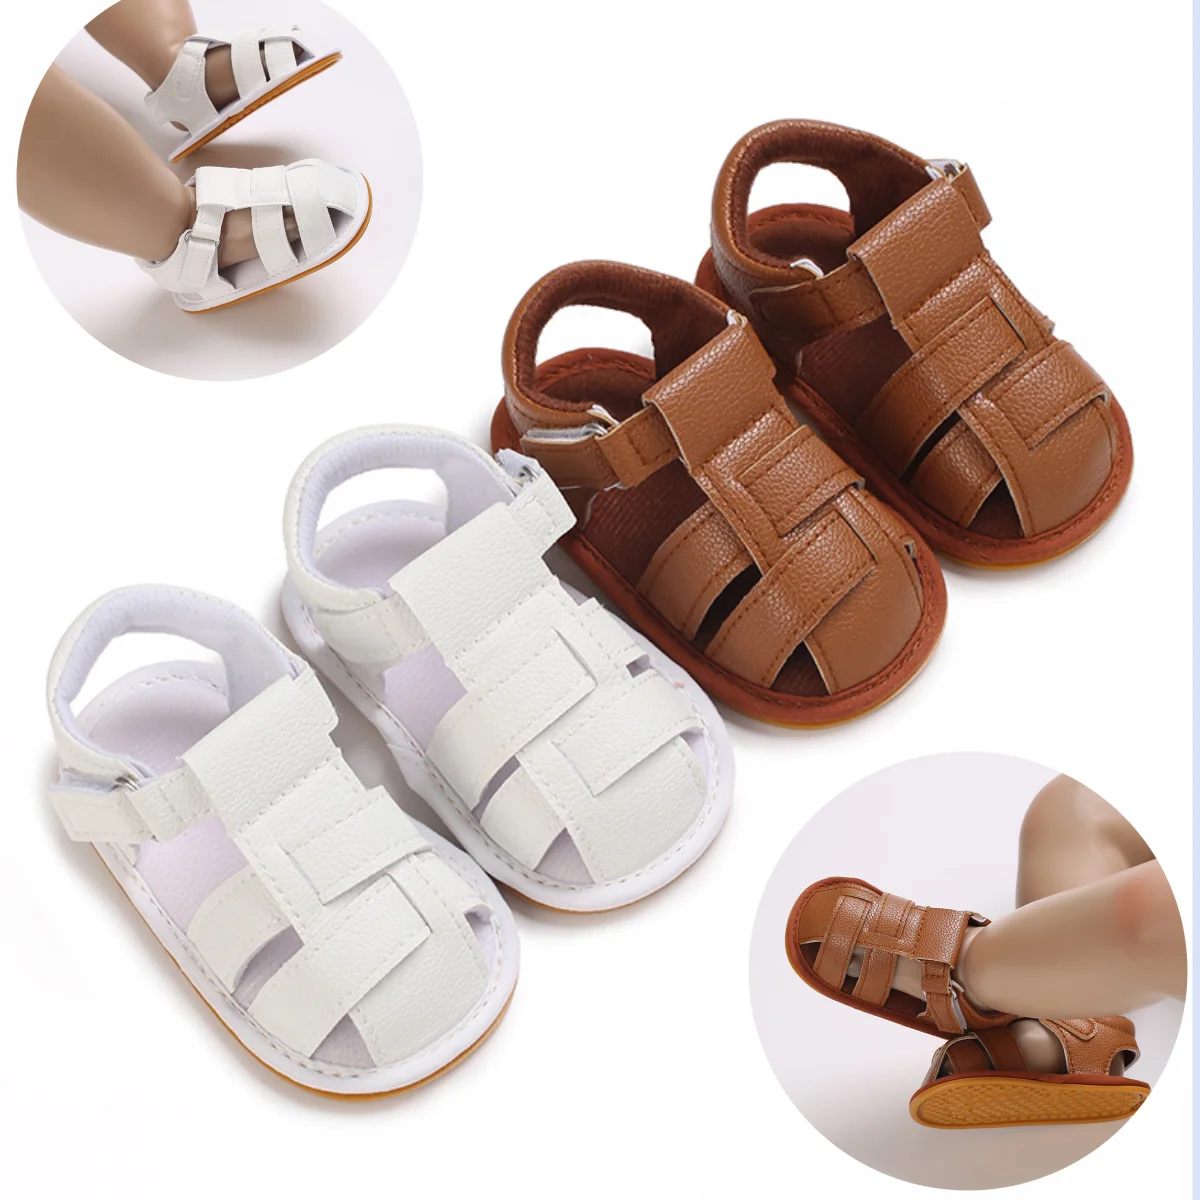 

Baby Summer Sandals Infant Boy Girl Shoes Rubber Soft Sole Non-Slip Toddler First Walker Baby Breathable Crib Shoes 0-18Months